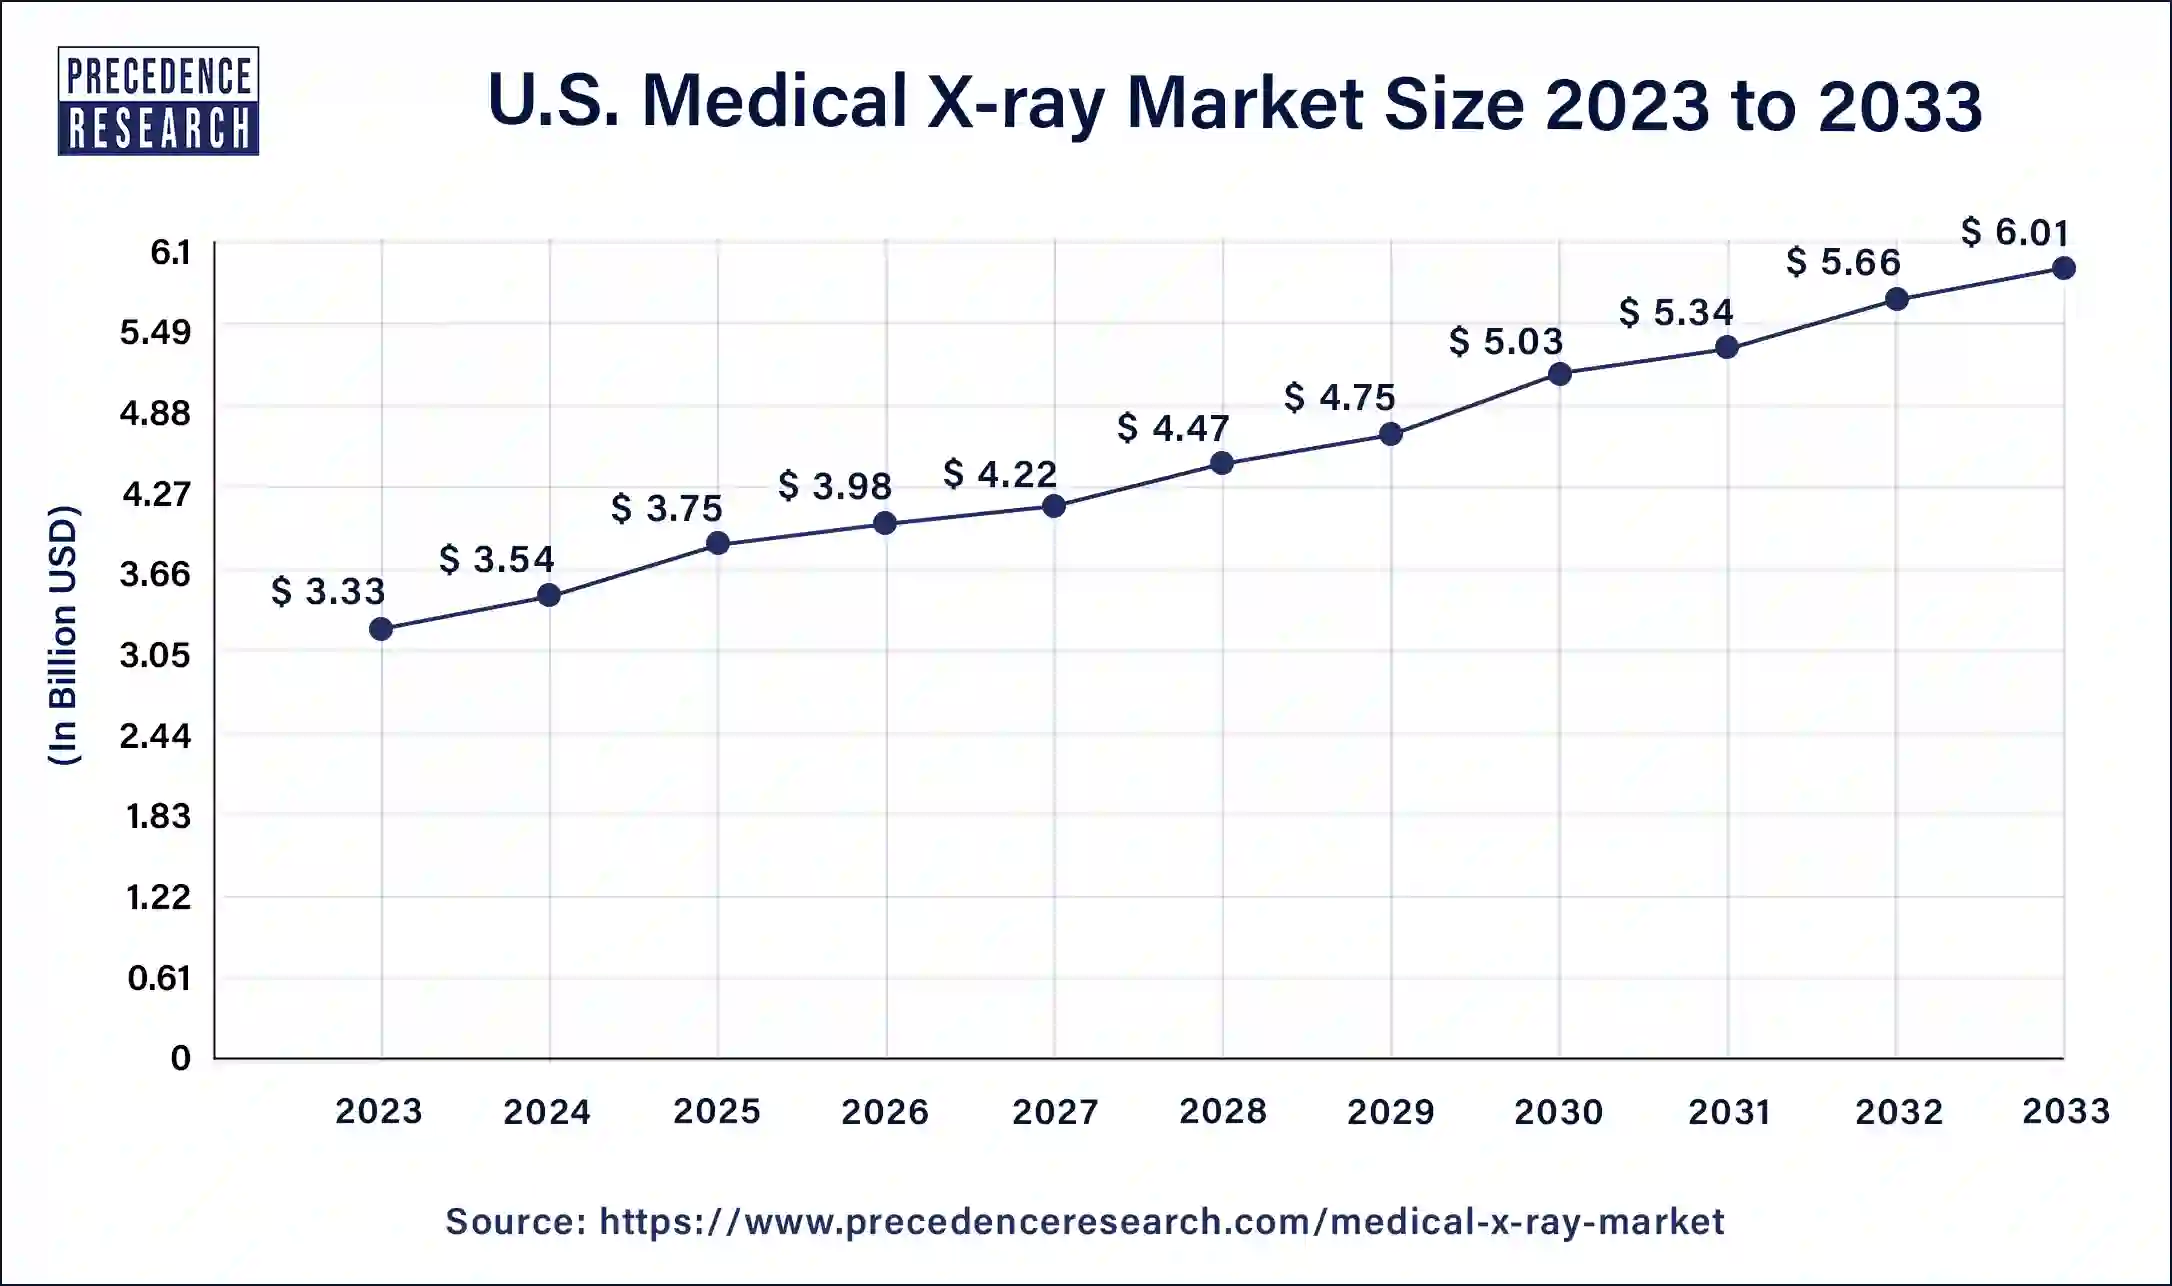 U.S. Medical X-ray Market Size 2024 to 2033